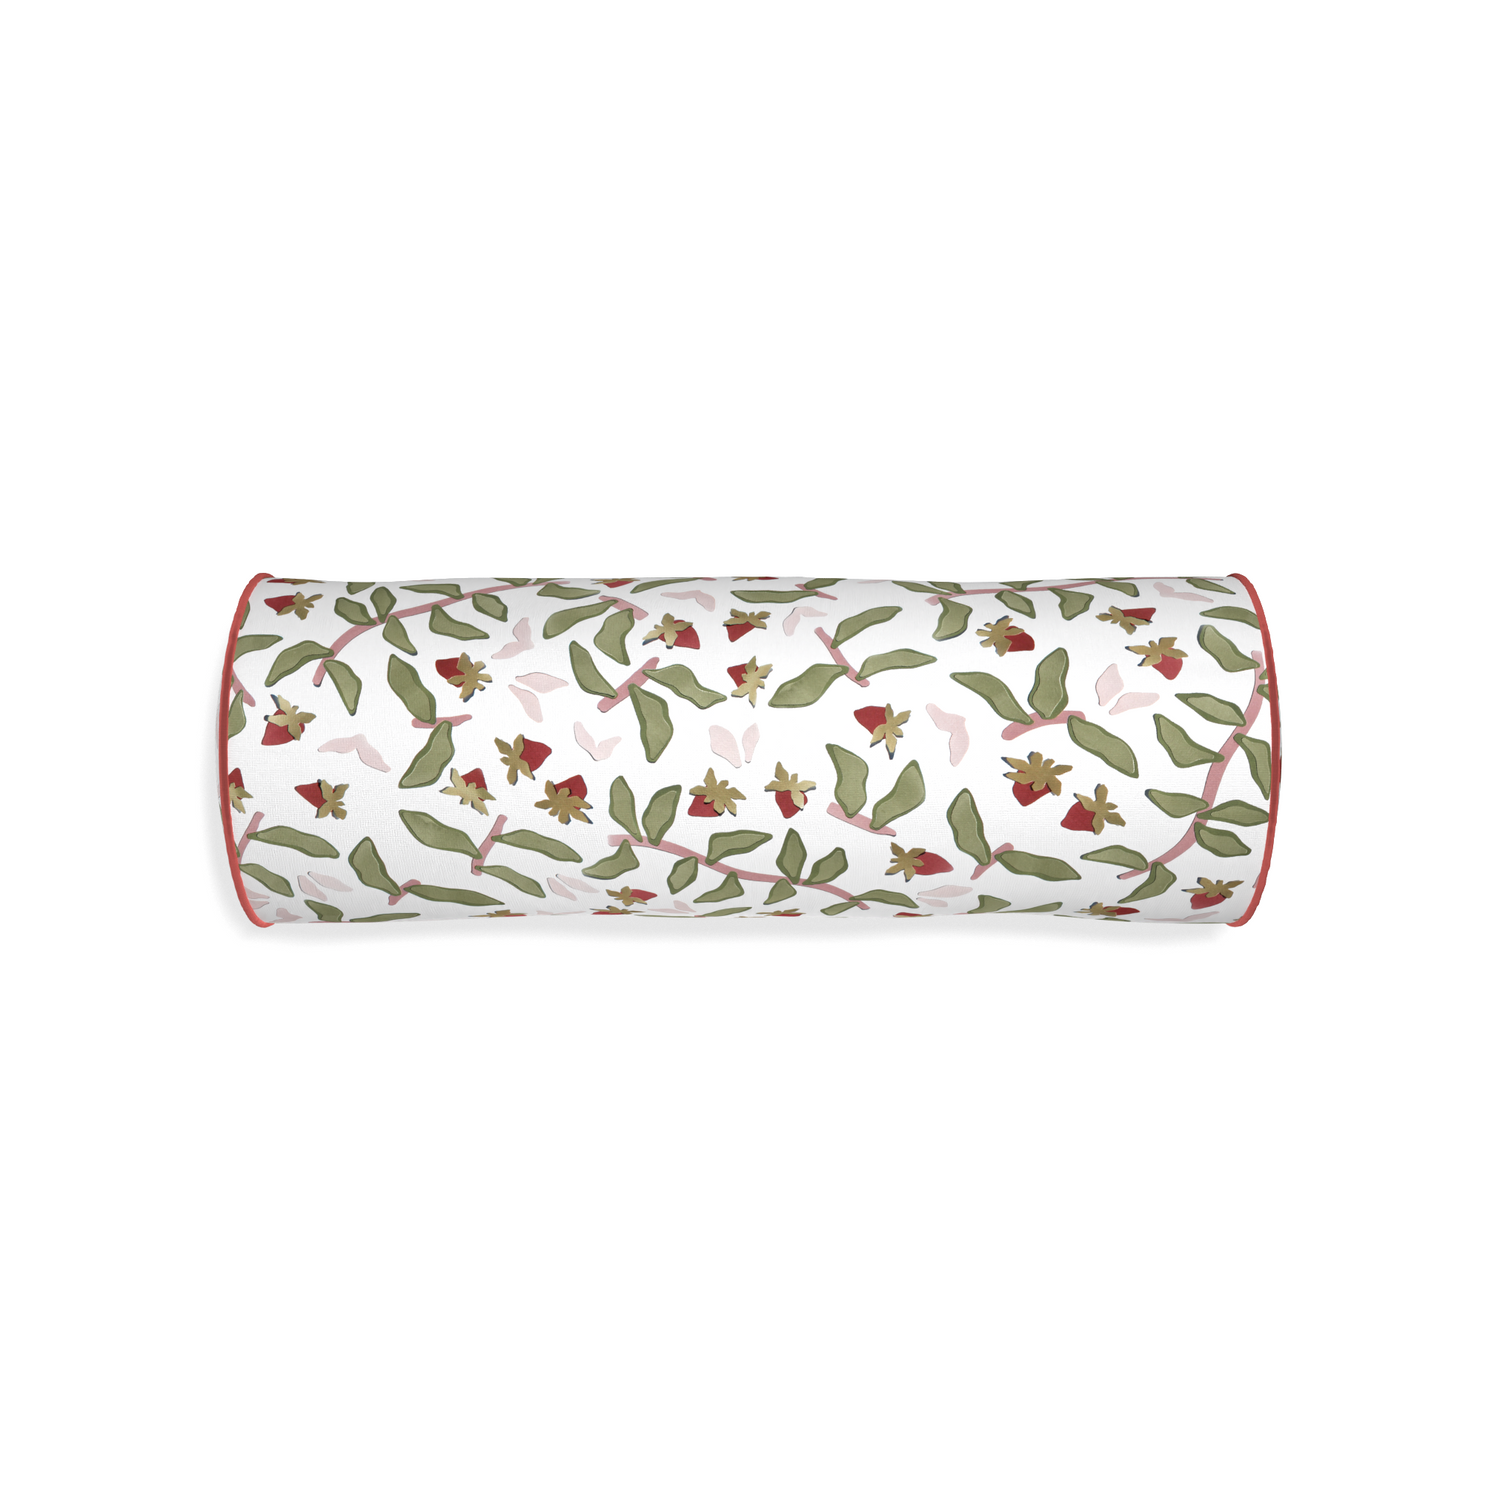 Bolster nellie custom strawberry & botanicalpillow with c piping on white background